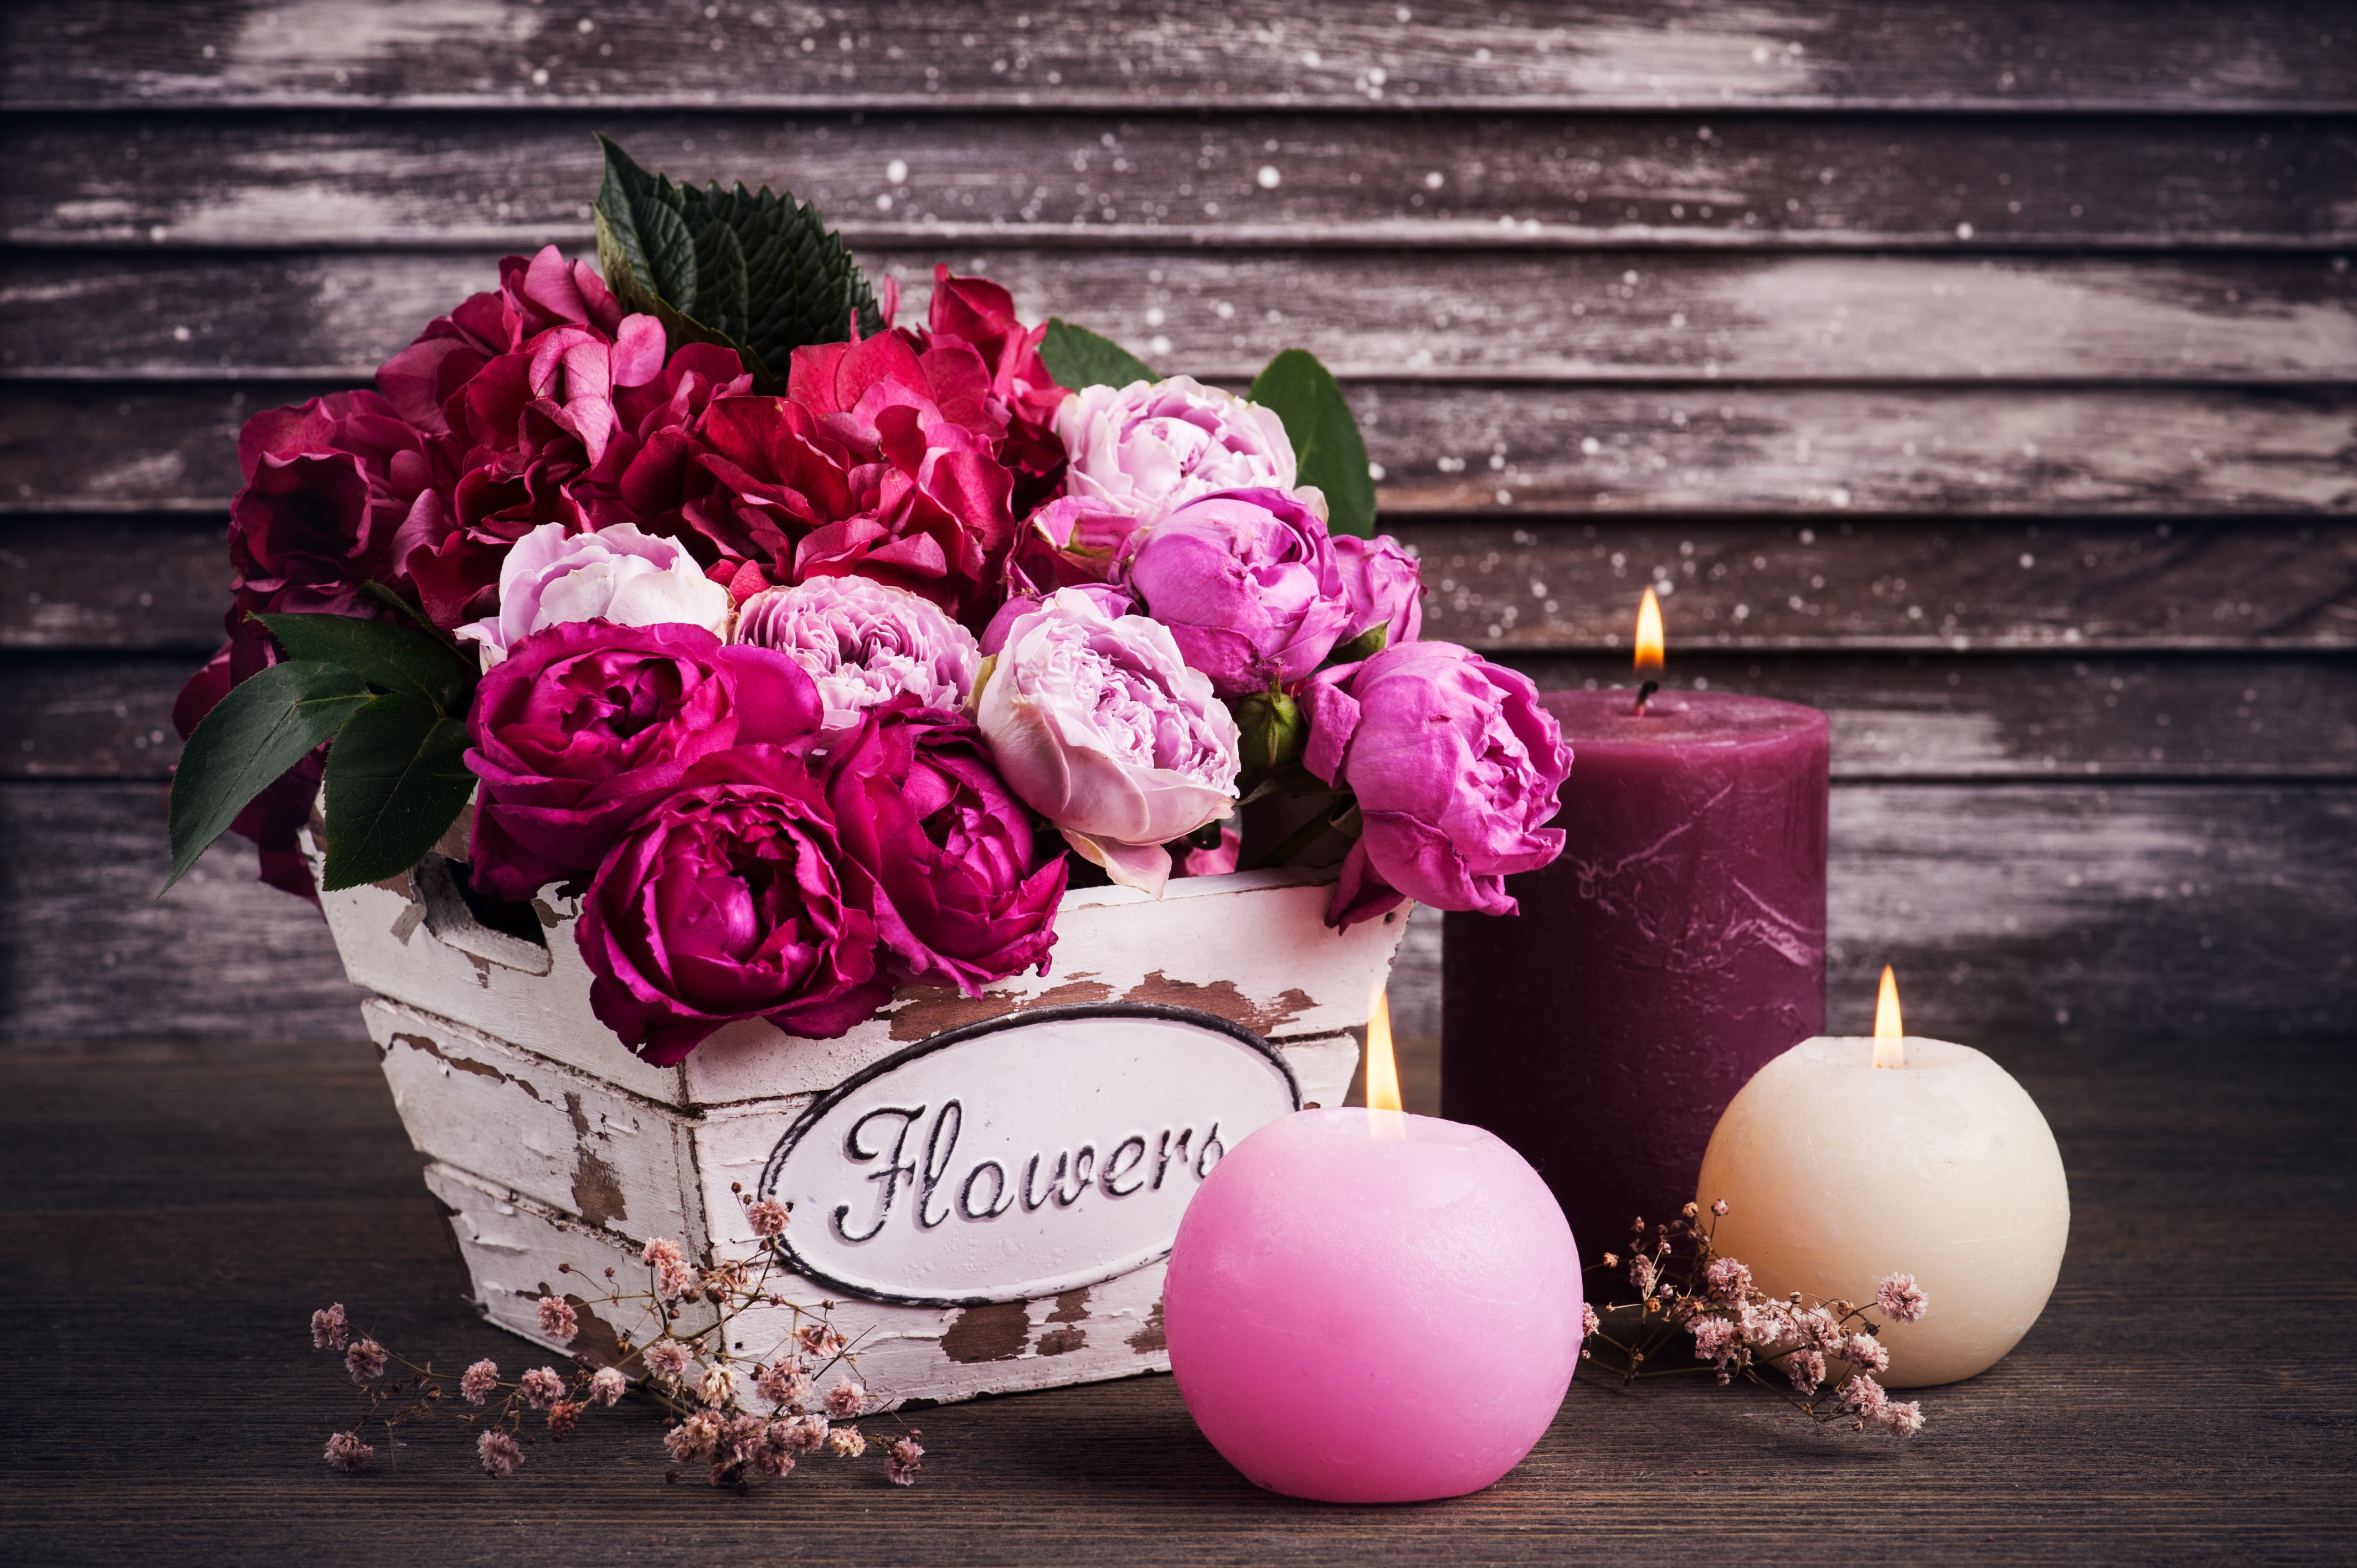 Free Photos - In This Stock Photo, A Candle Is Lit Inside A Decorative  Vase, Creating An Inviting Atmosphere. The Vase Is Adorned With A Purple  Flower, Enhancing Its Aesthetic Appeal. The